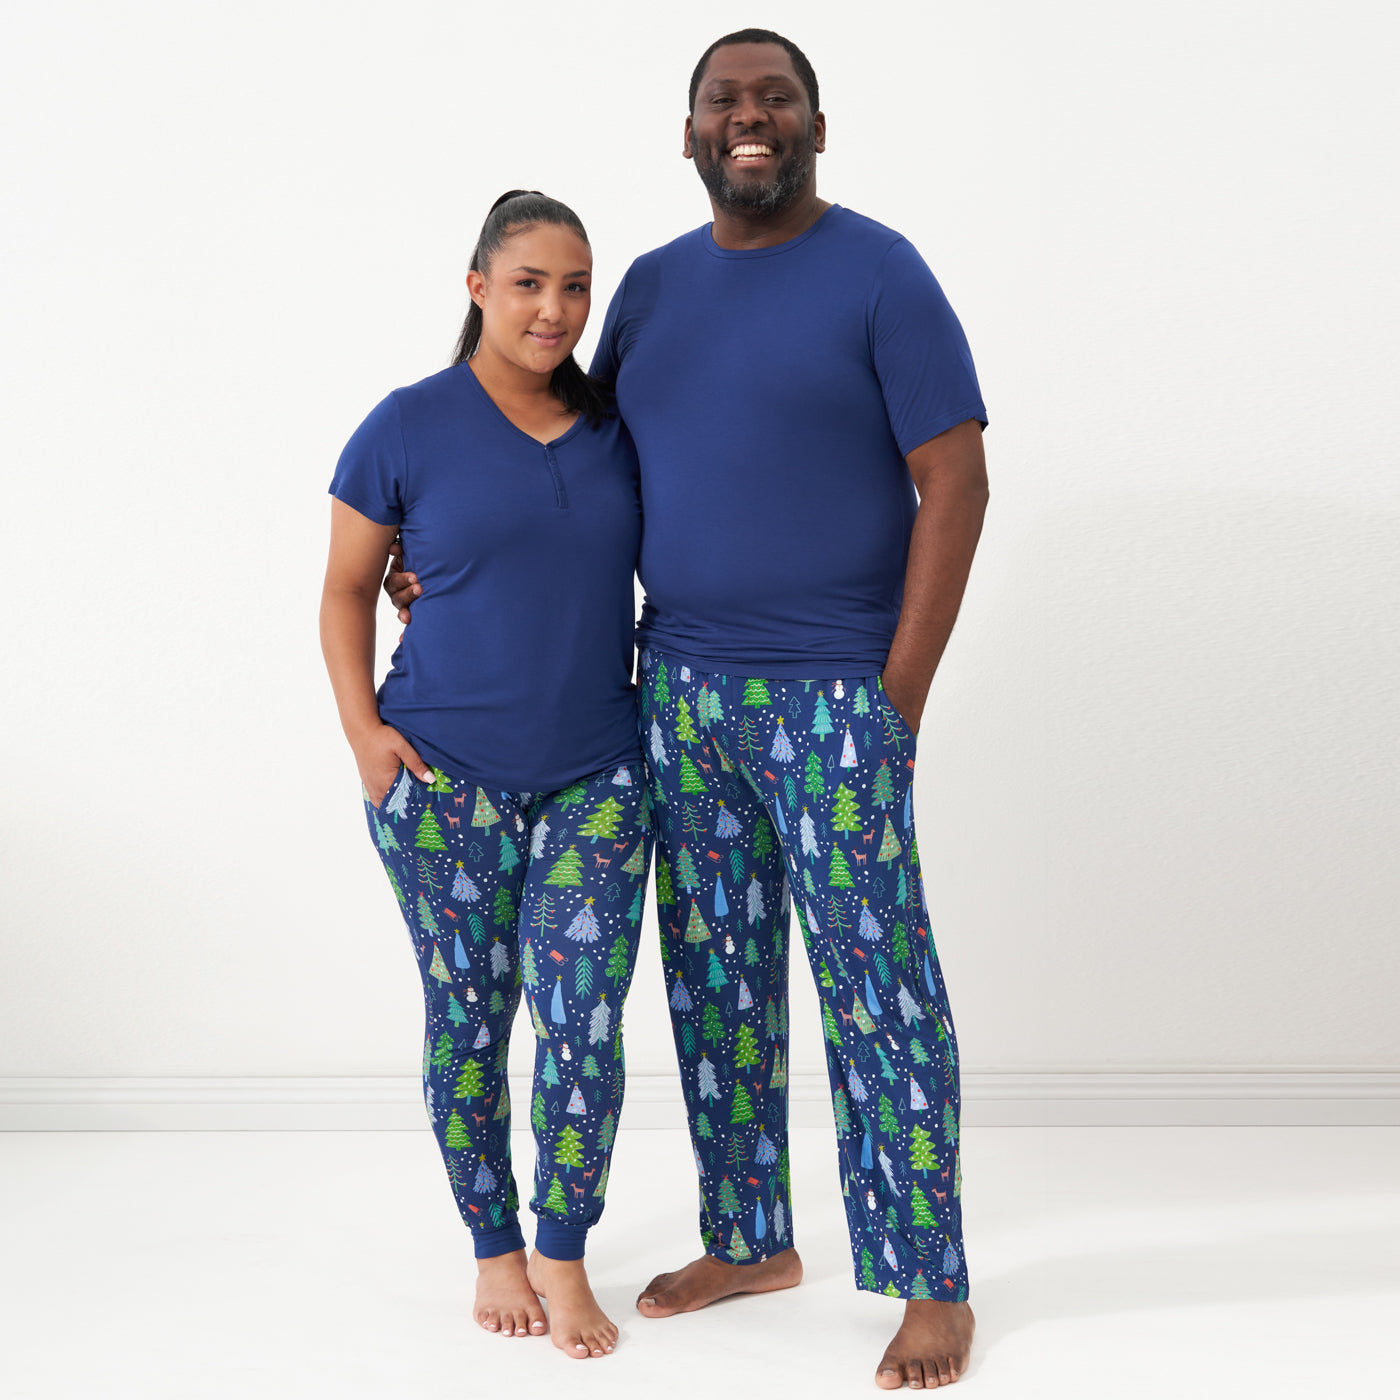 Couple posing together wearing matching pajamas. Man is wearing men's Blue Merry and Bright pajama bottoms paired with a solid Sapphire short sleeve pajama top. Woman is wearing women's Blue Merry and Bright pajama bottoms and a solid women's Sapphire short sleeve pajama top